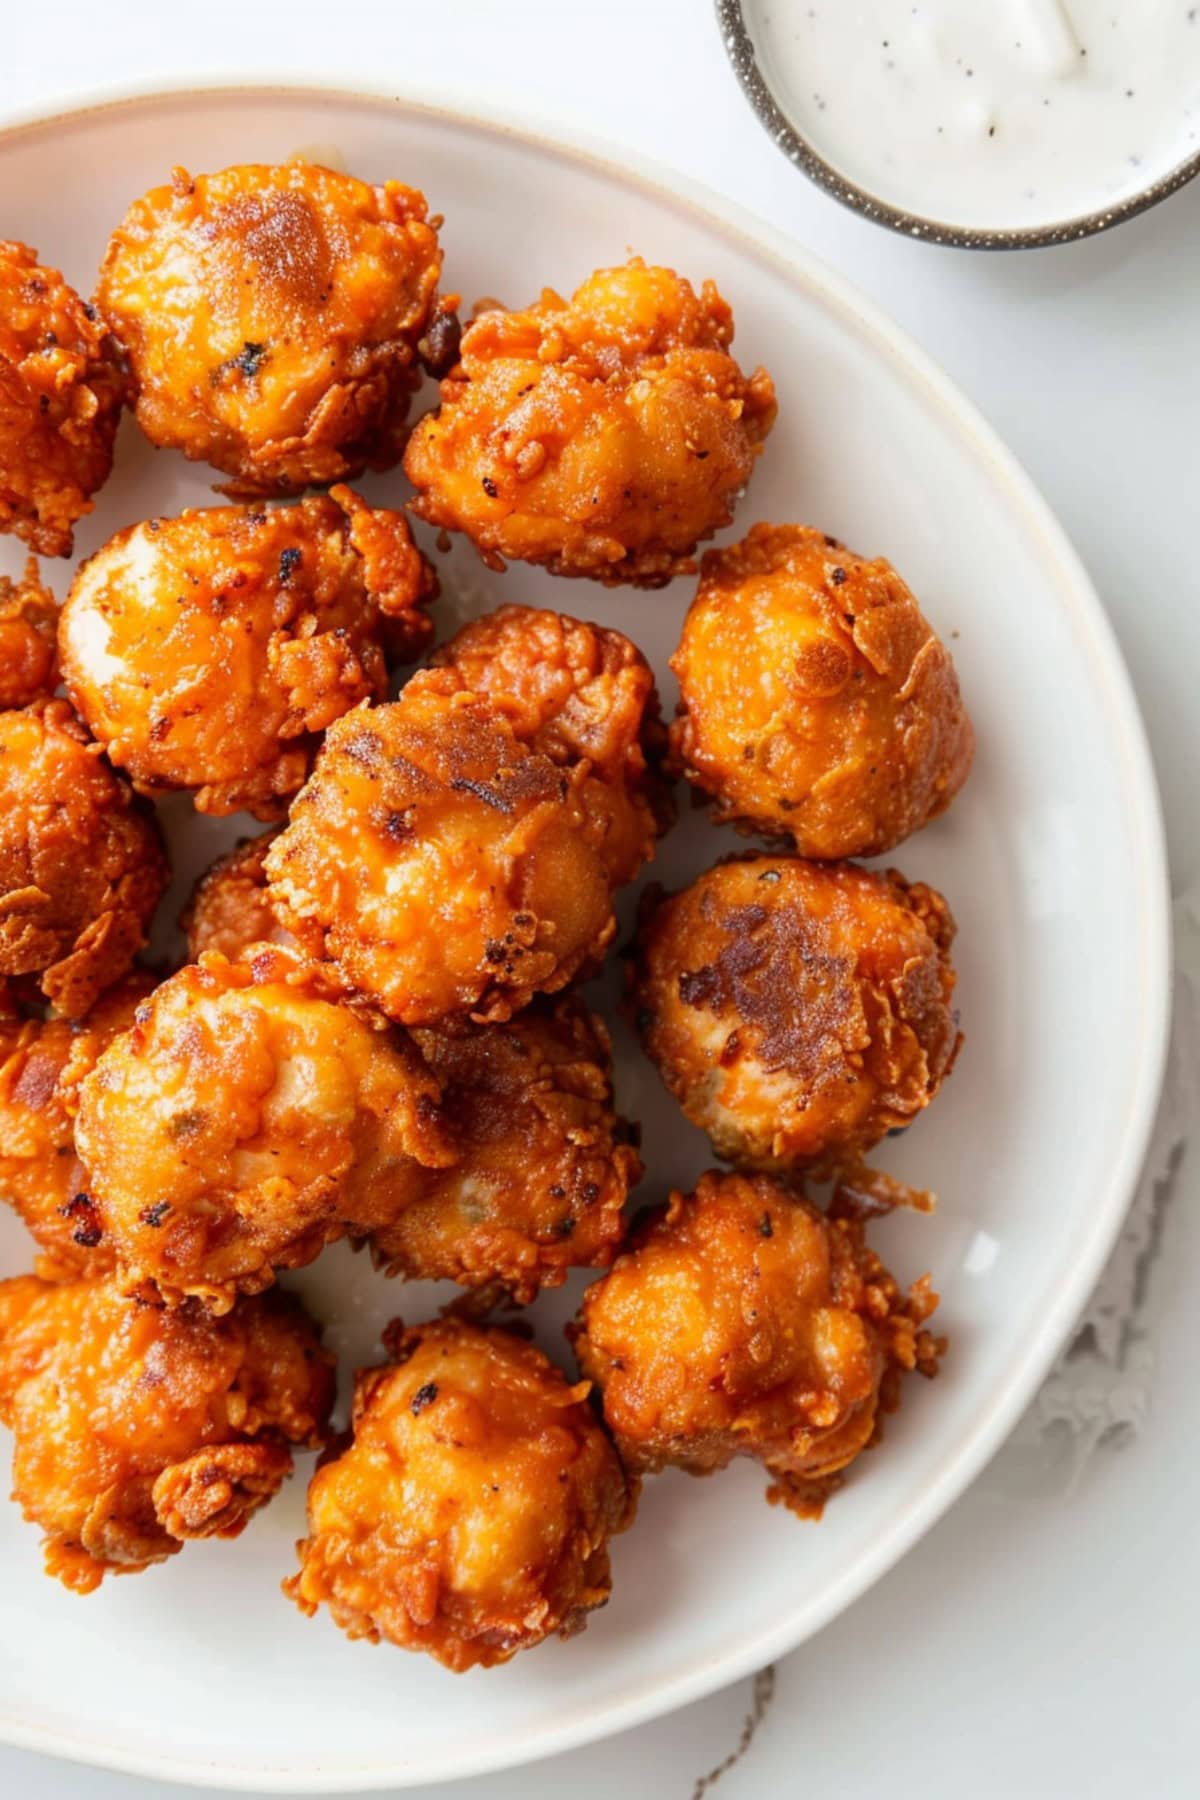 Spicy buffalo chicken bites, crispy and golden brown, perfect for snacking or appetizers